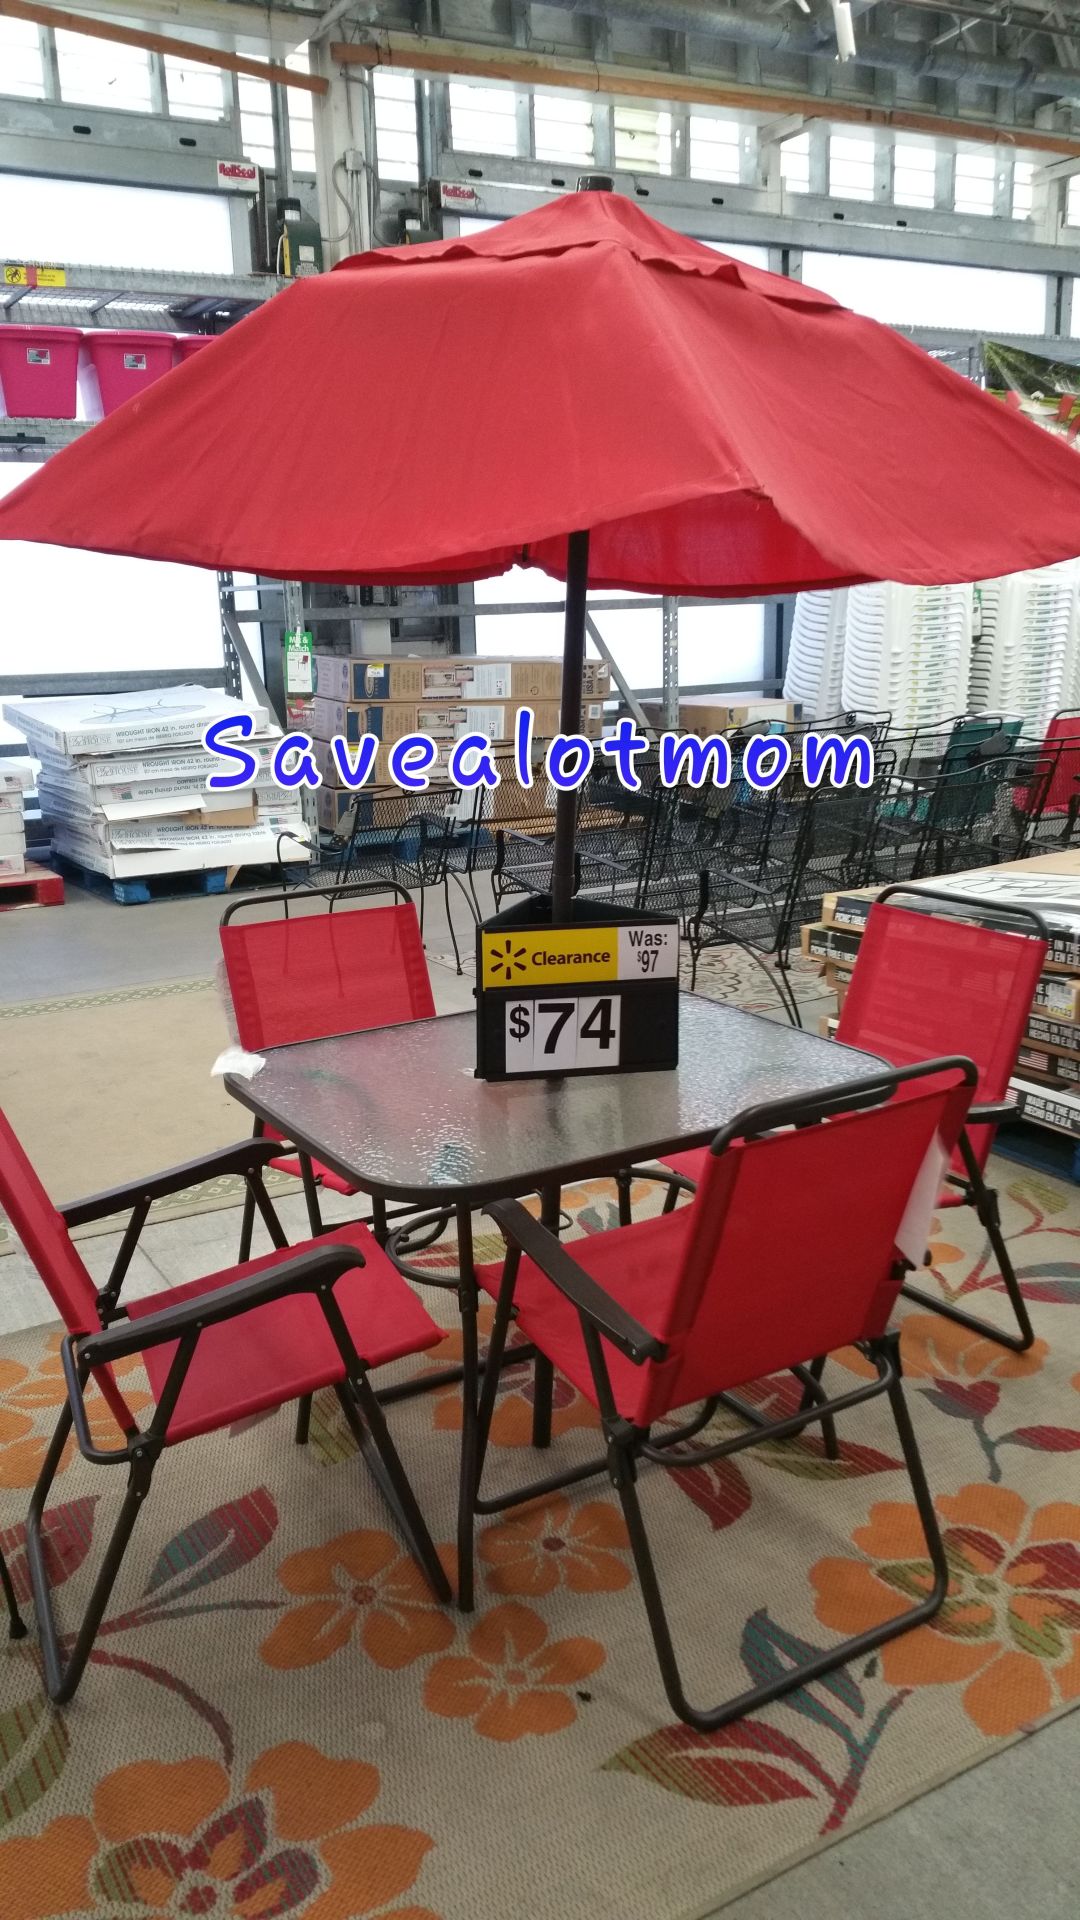 Summer Clearance At Walmart Outdoor Furniture Save A Lot Mom